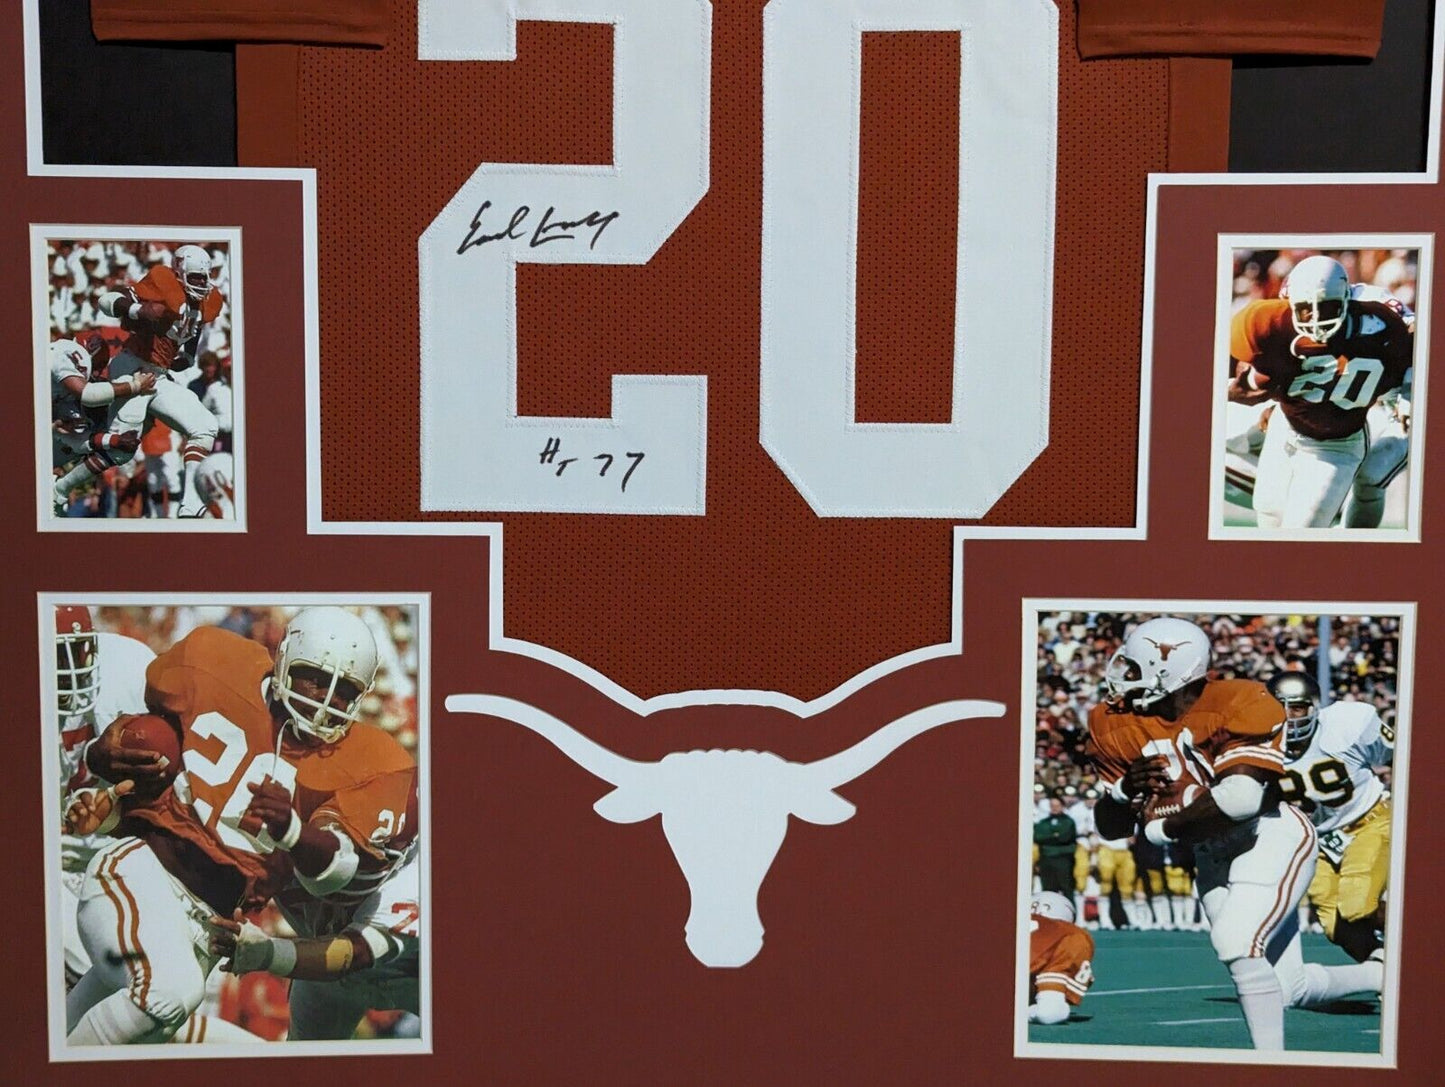 MVP Authentics Framed Texas Longhorns Earl Campbell Autograph Inscribed Signed Jersey Psa Coa 495 sports jersey framing , jersey framing